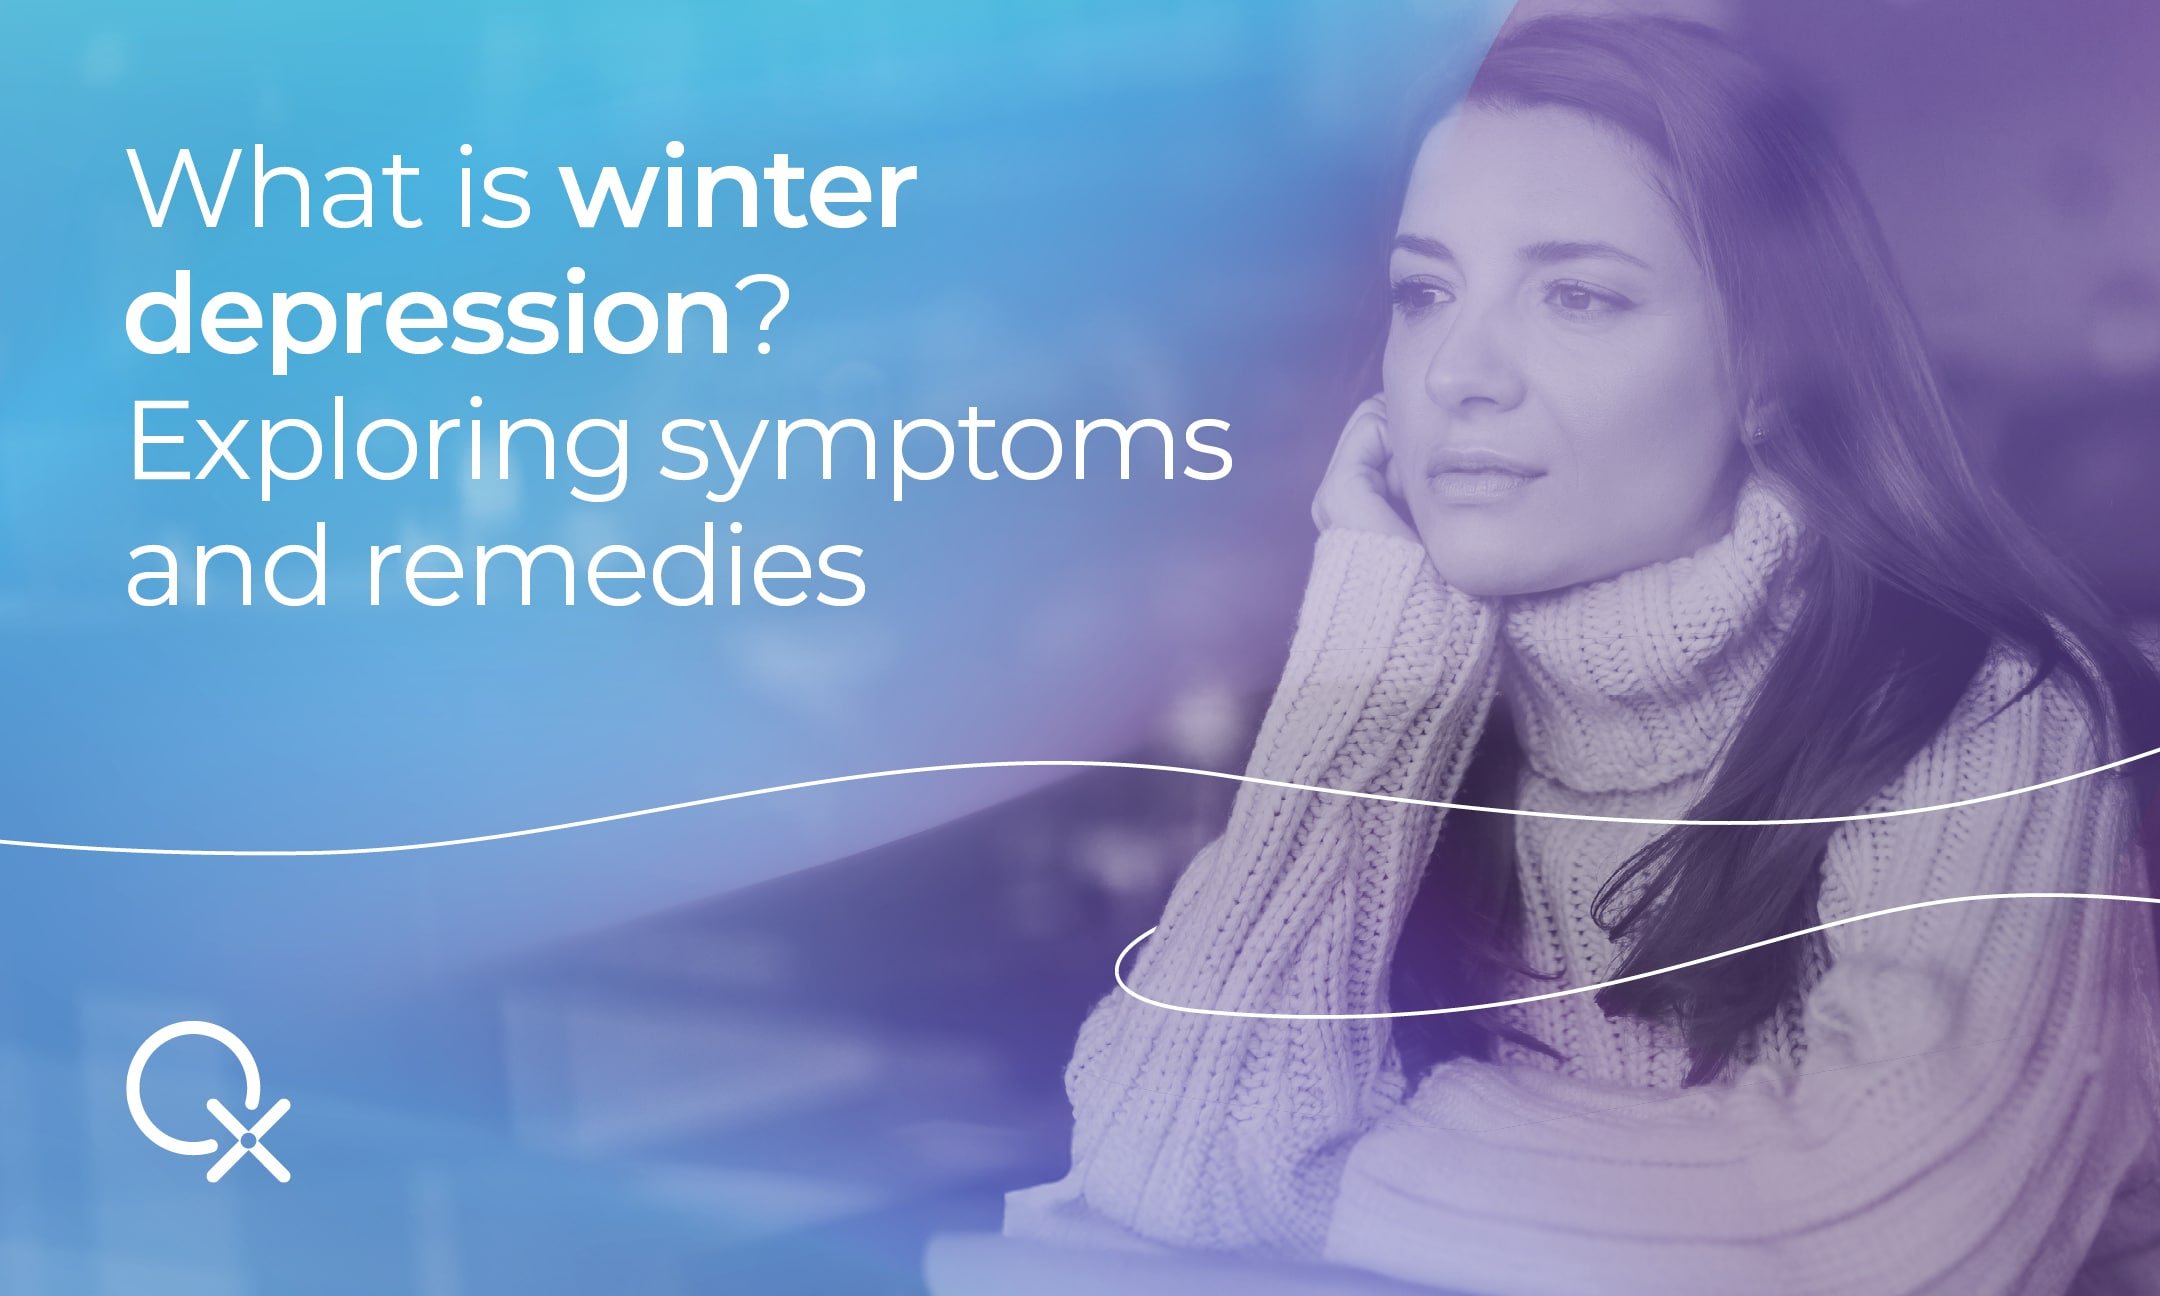 Experts believe winter depression is linked to changes in light exposure